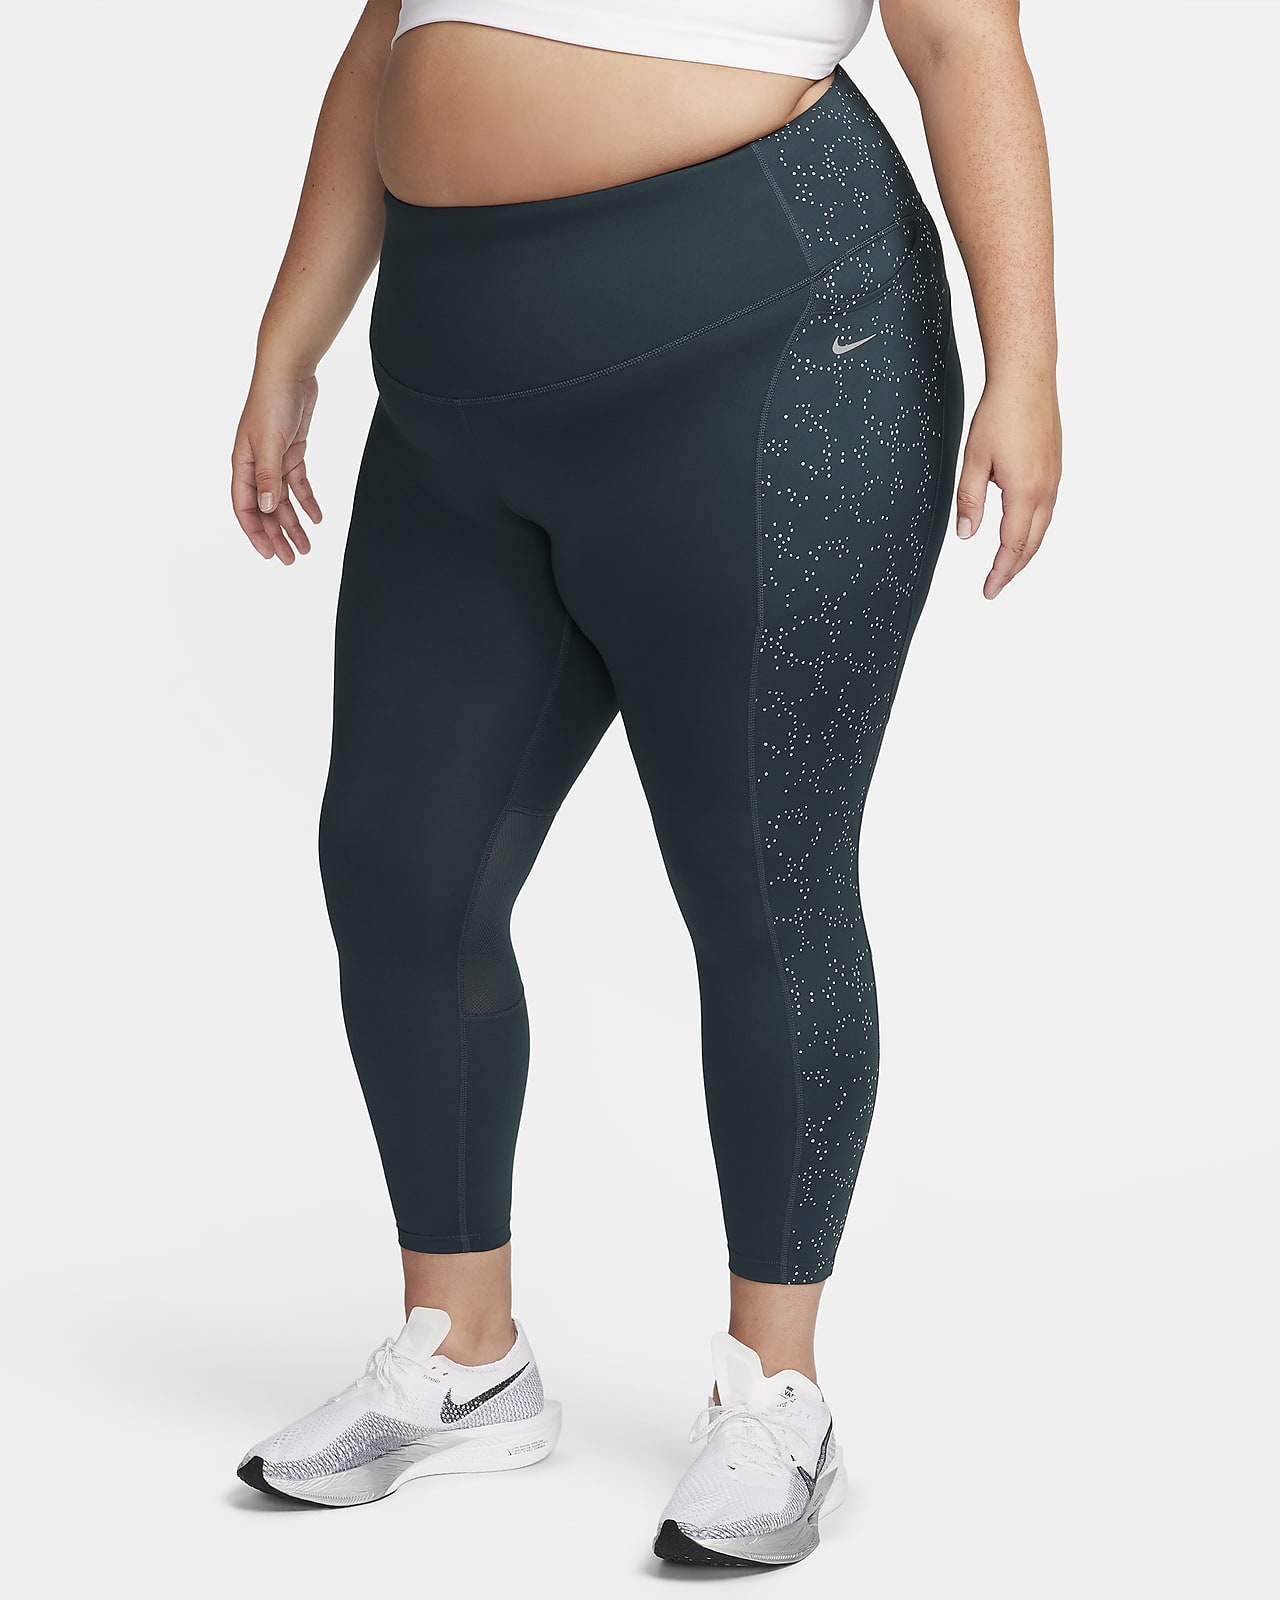 Nike One Leggings Textured Faux Leather 7/8 Mid-Rise Shiny Black DC7174-010  XS for sale online